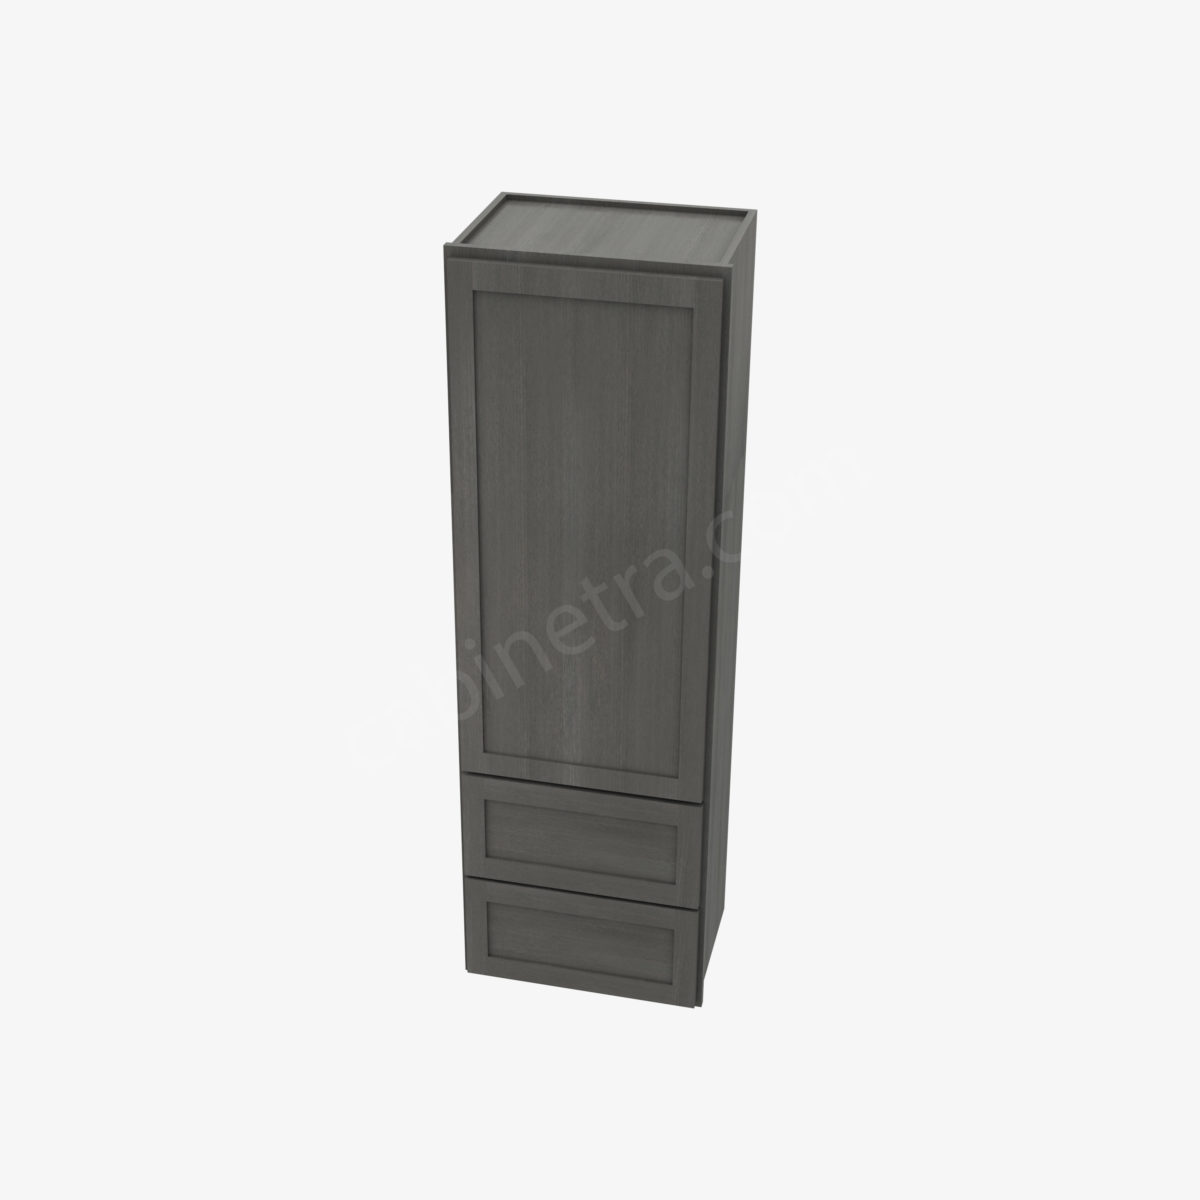 AG W2D1860 3 Forevermark Greystone Shaker Cabinetra scaled